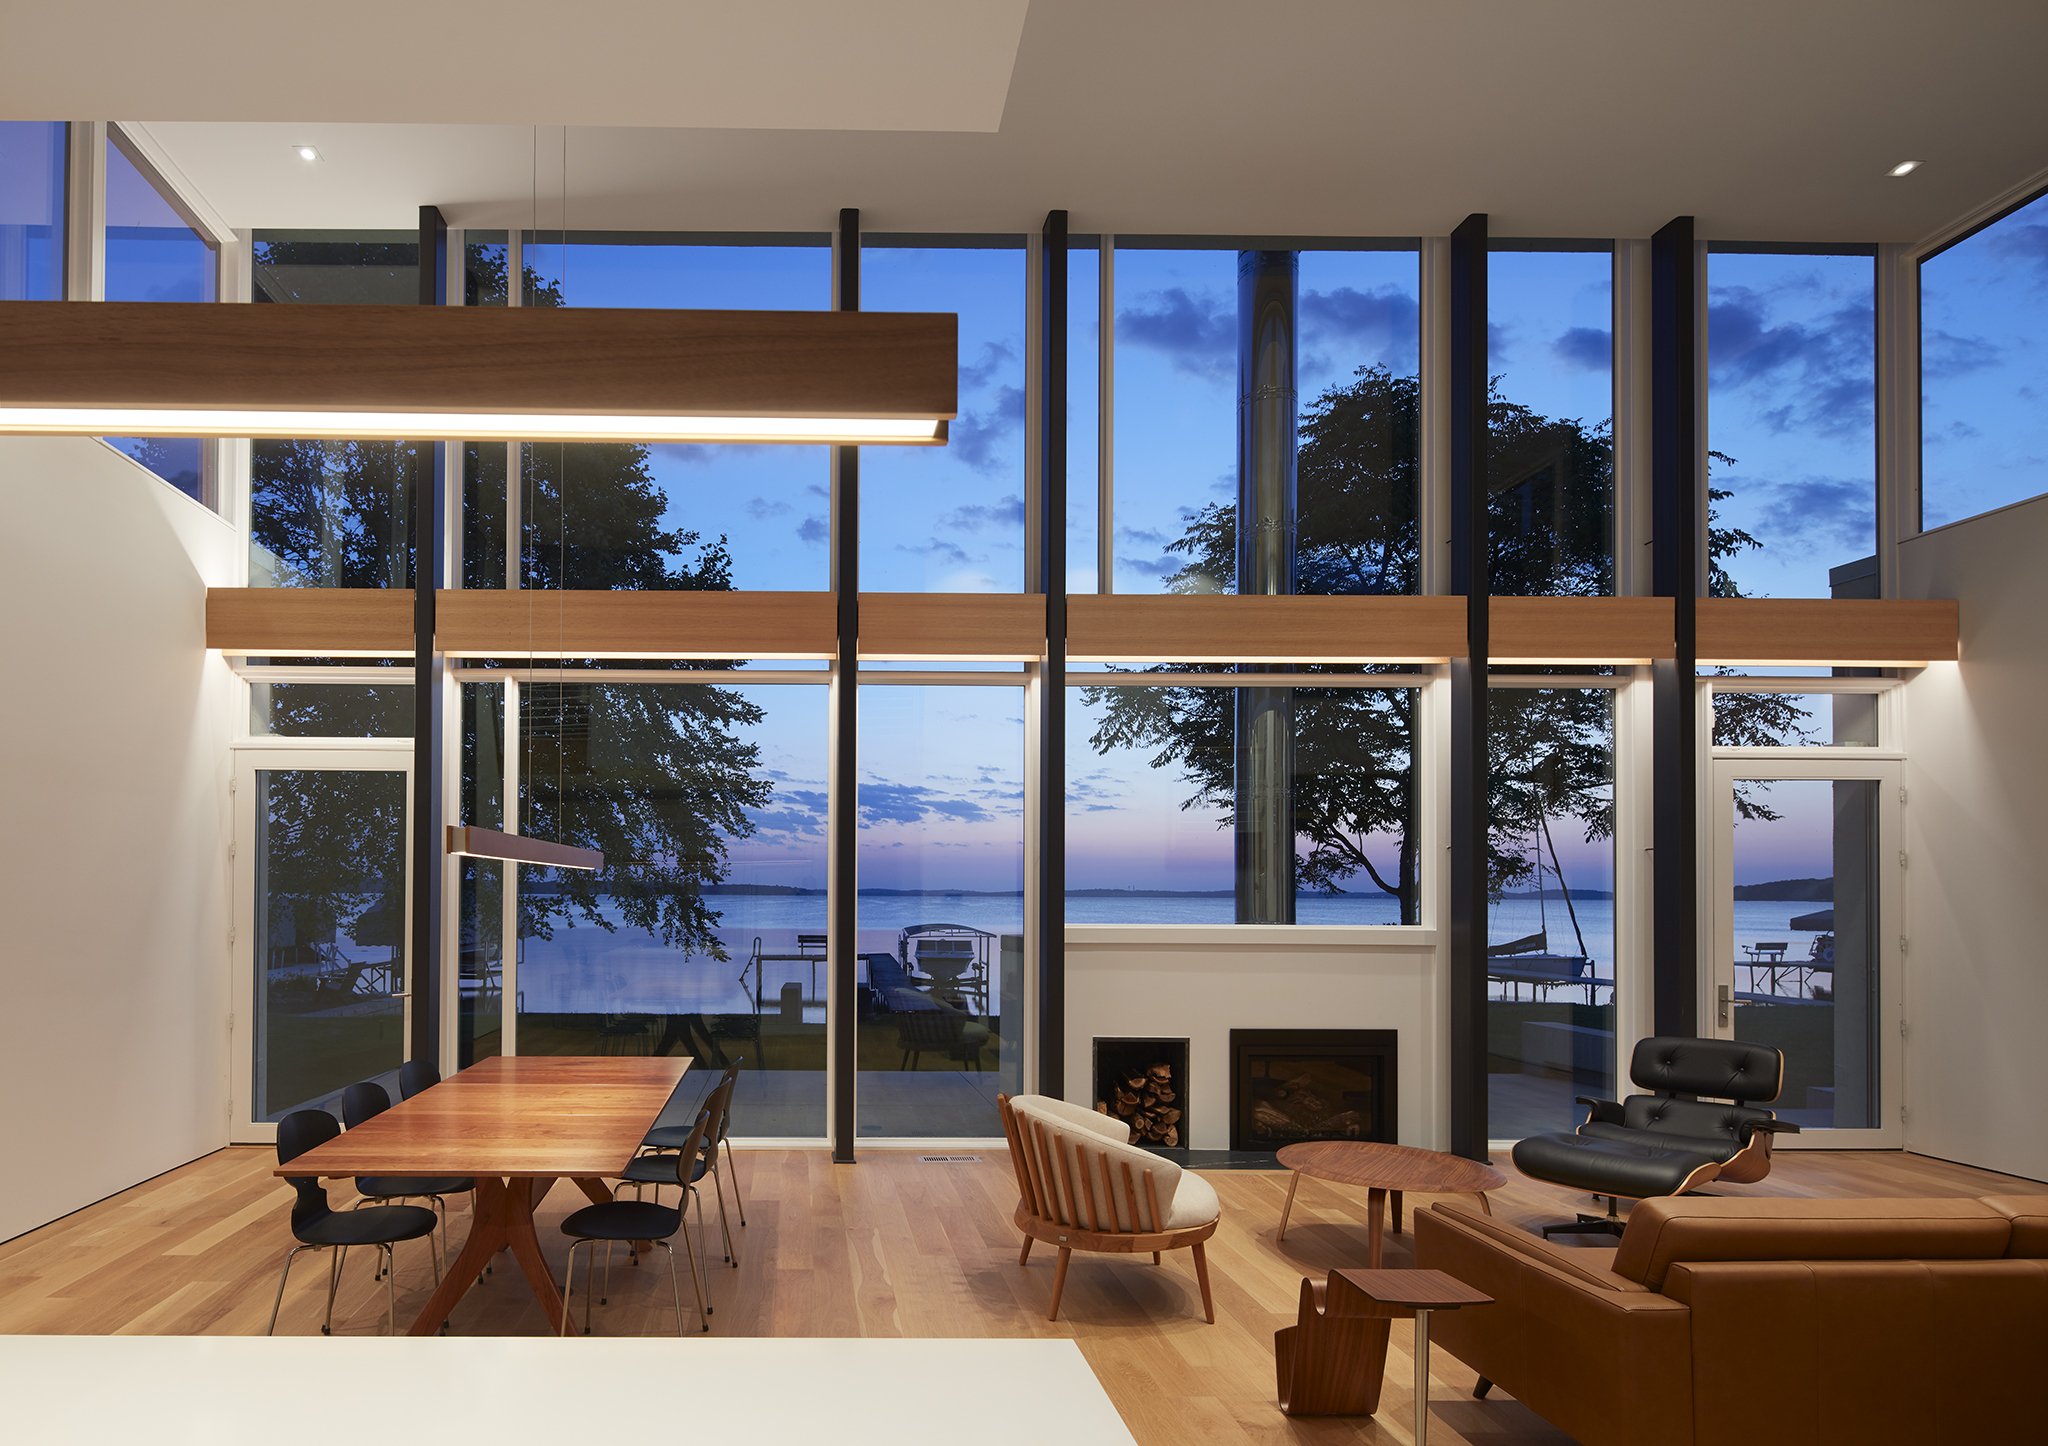  Spring Harbor House  N. Scott Johnson, XDEA Architects  Madison, WI     Return to Projects  